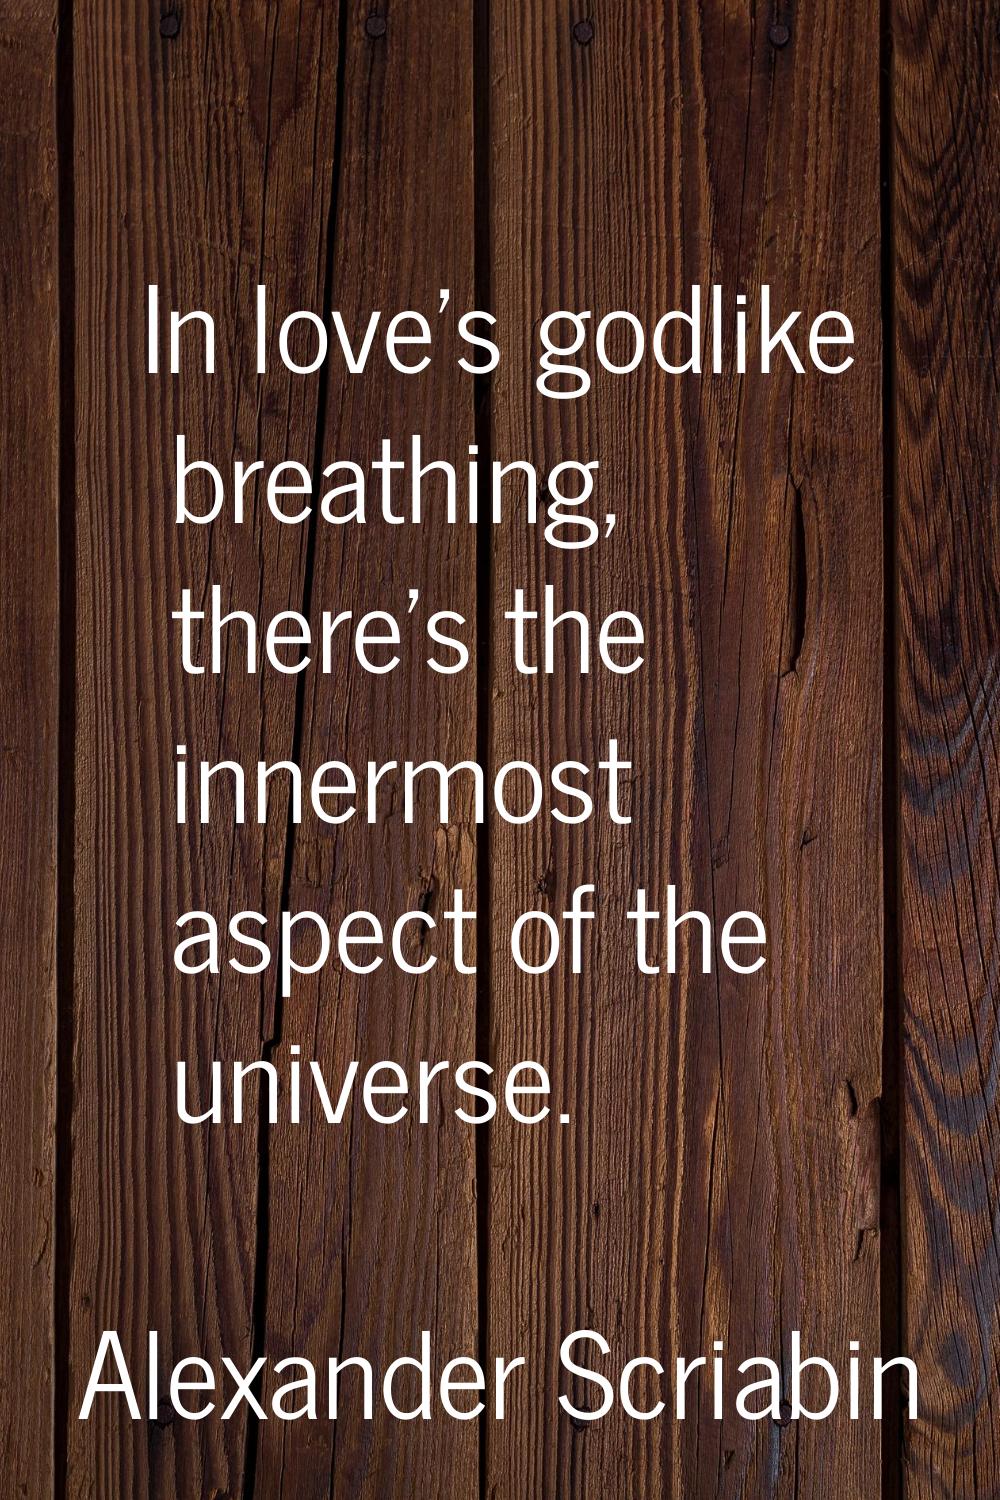 In love's godlike breathing, there's the innermost aspect of the universe.